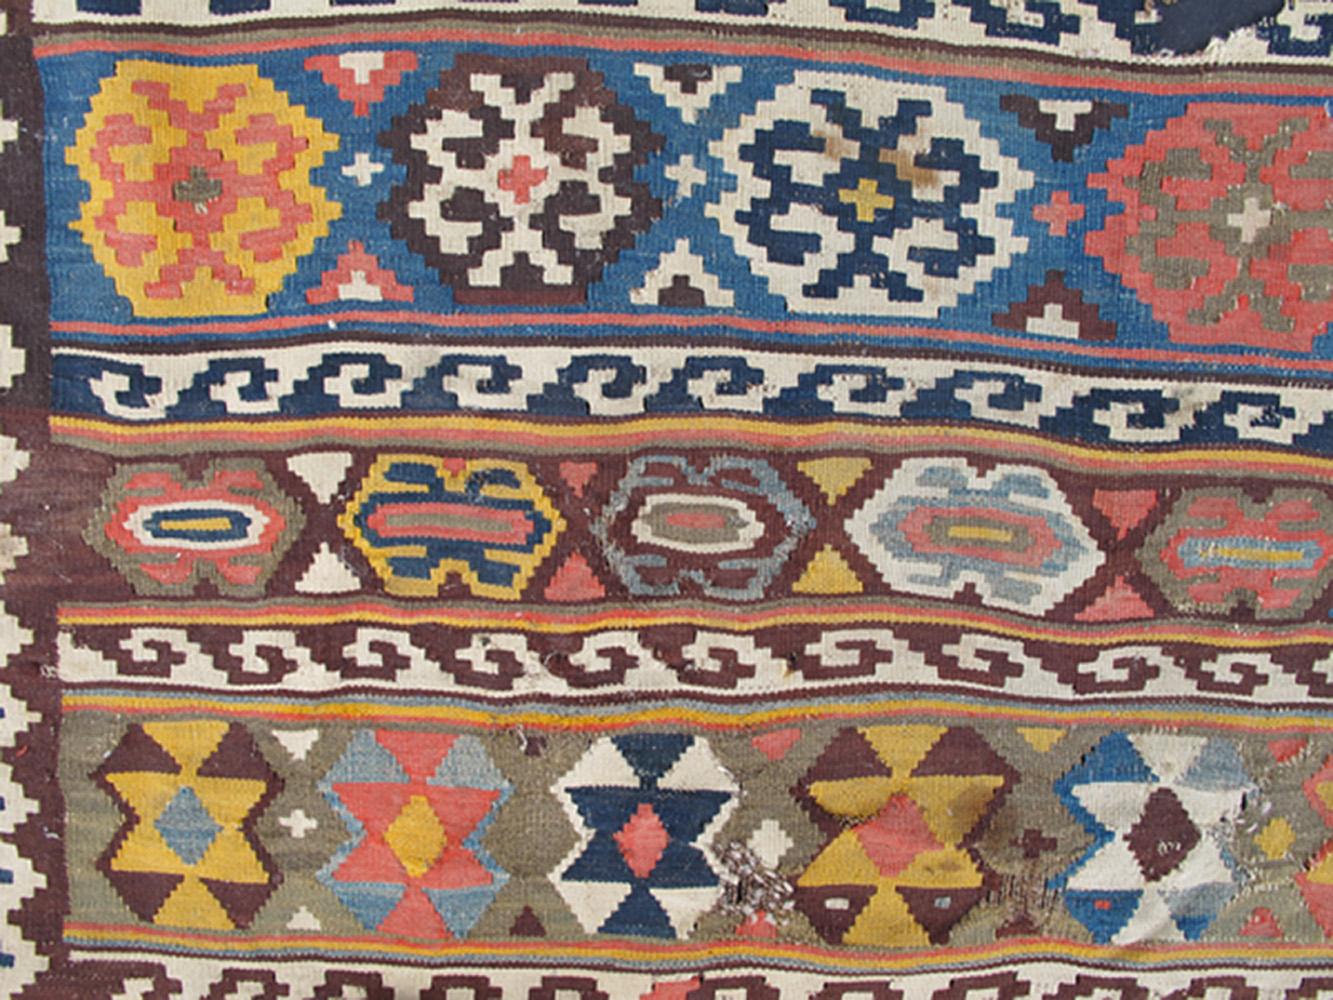 Hand-Woven Antique Persian Kilim Fragment For Sale